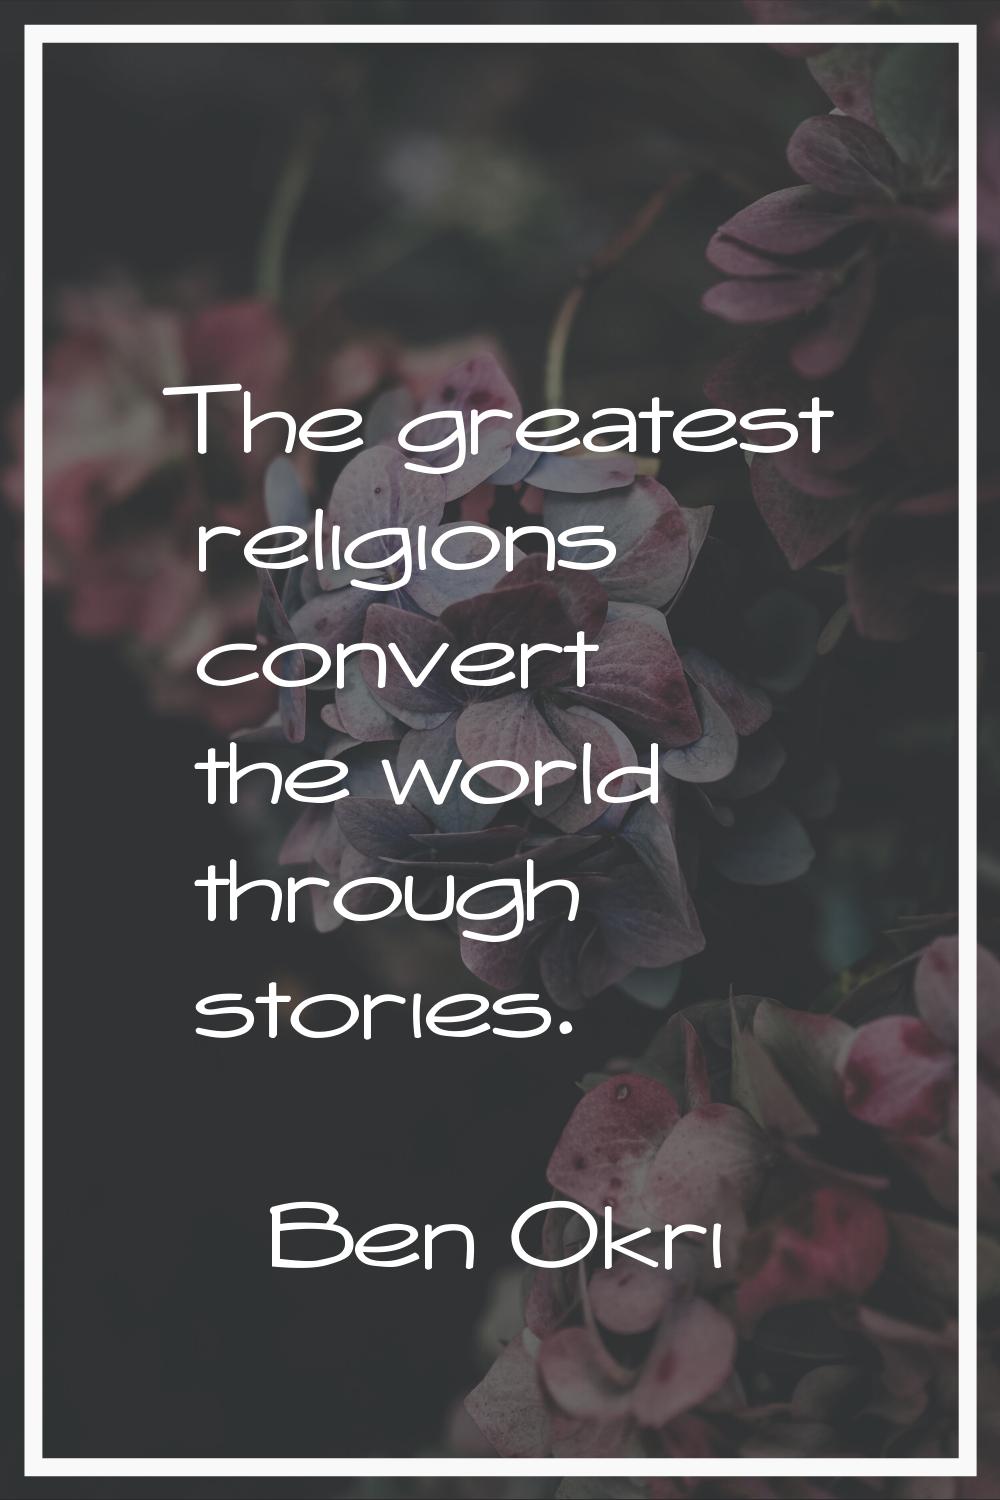 The greatest religions convert the world through stories.